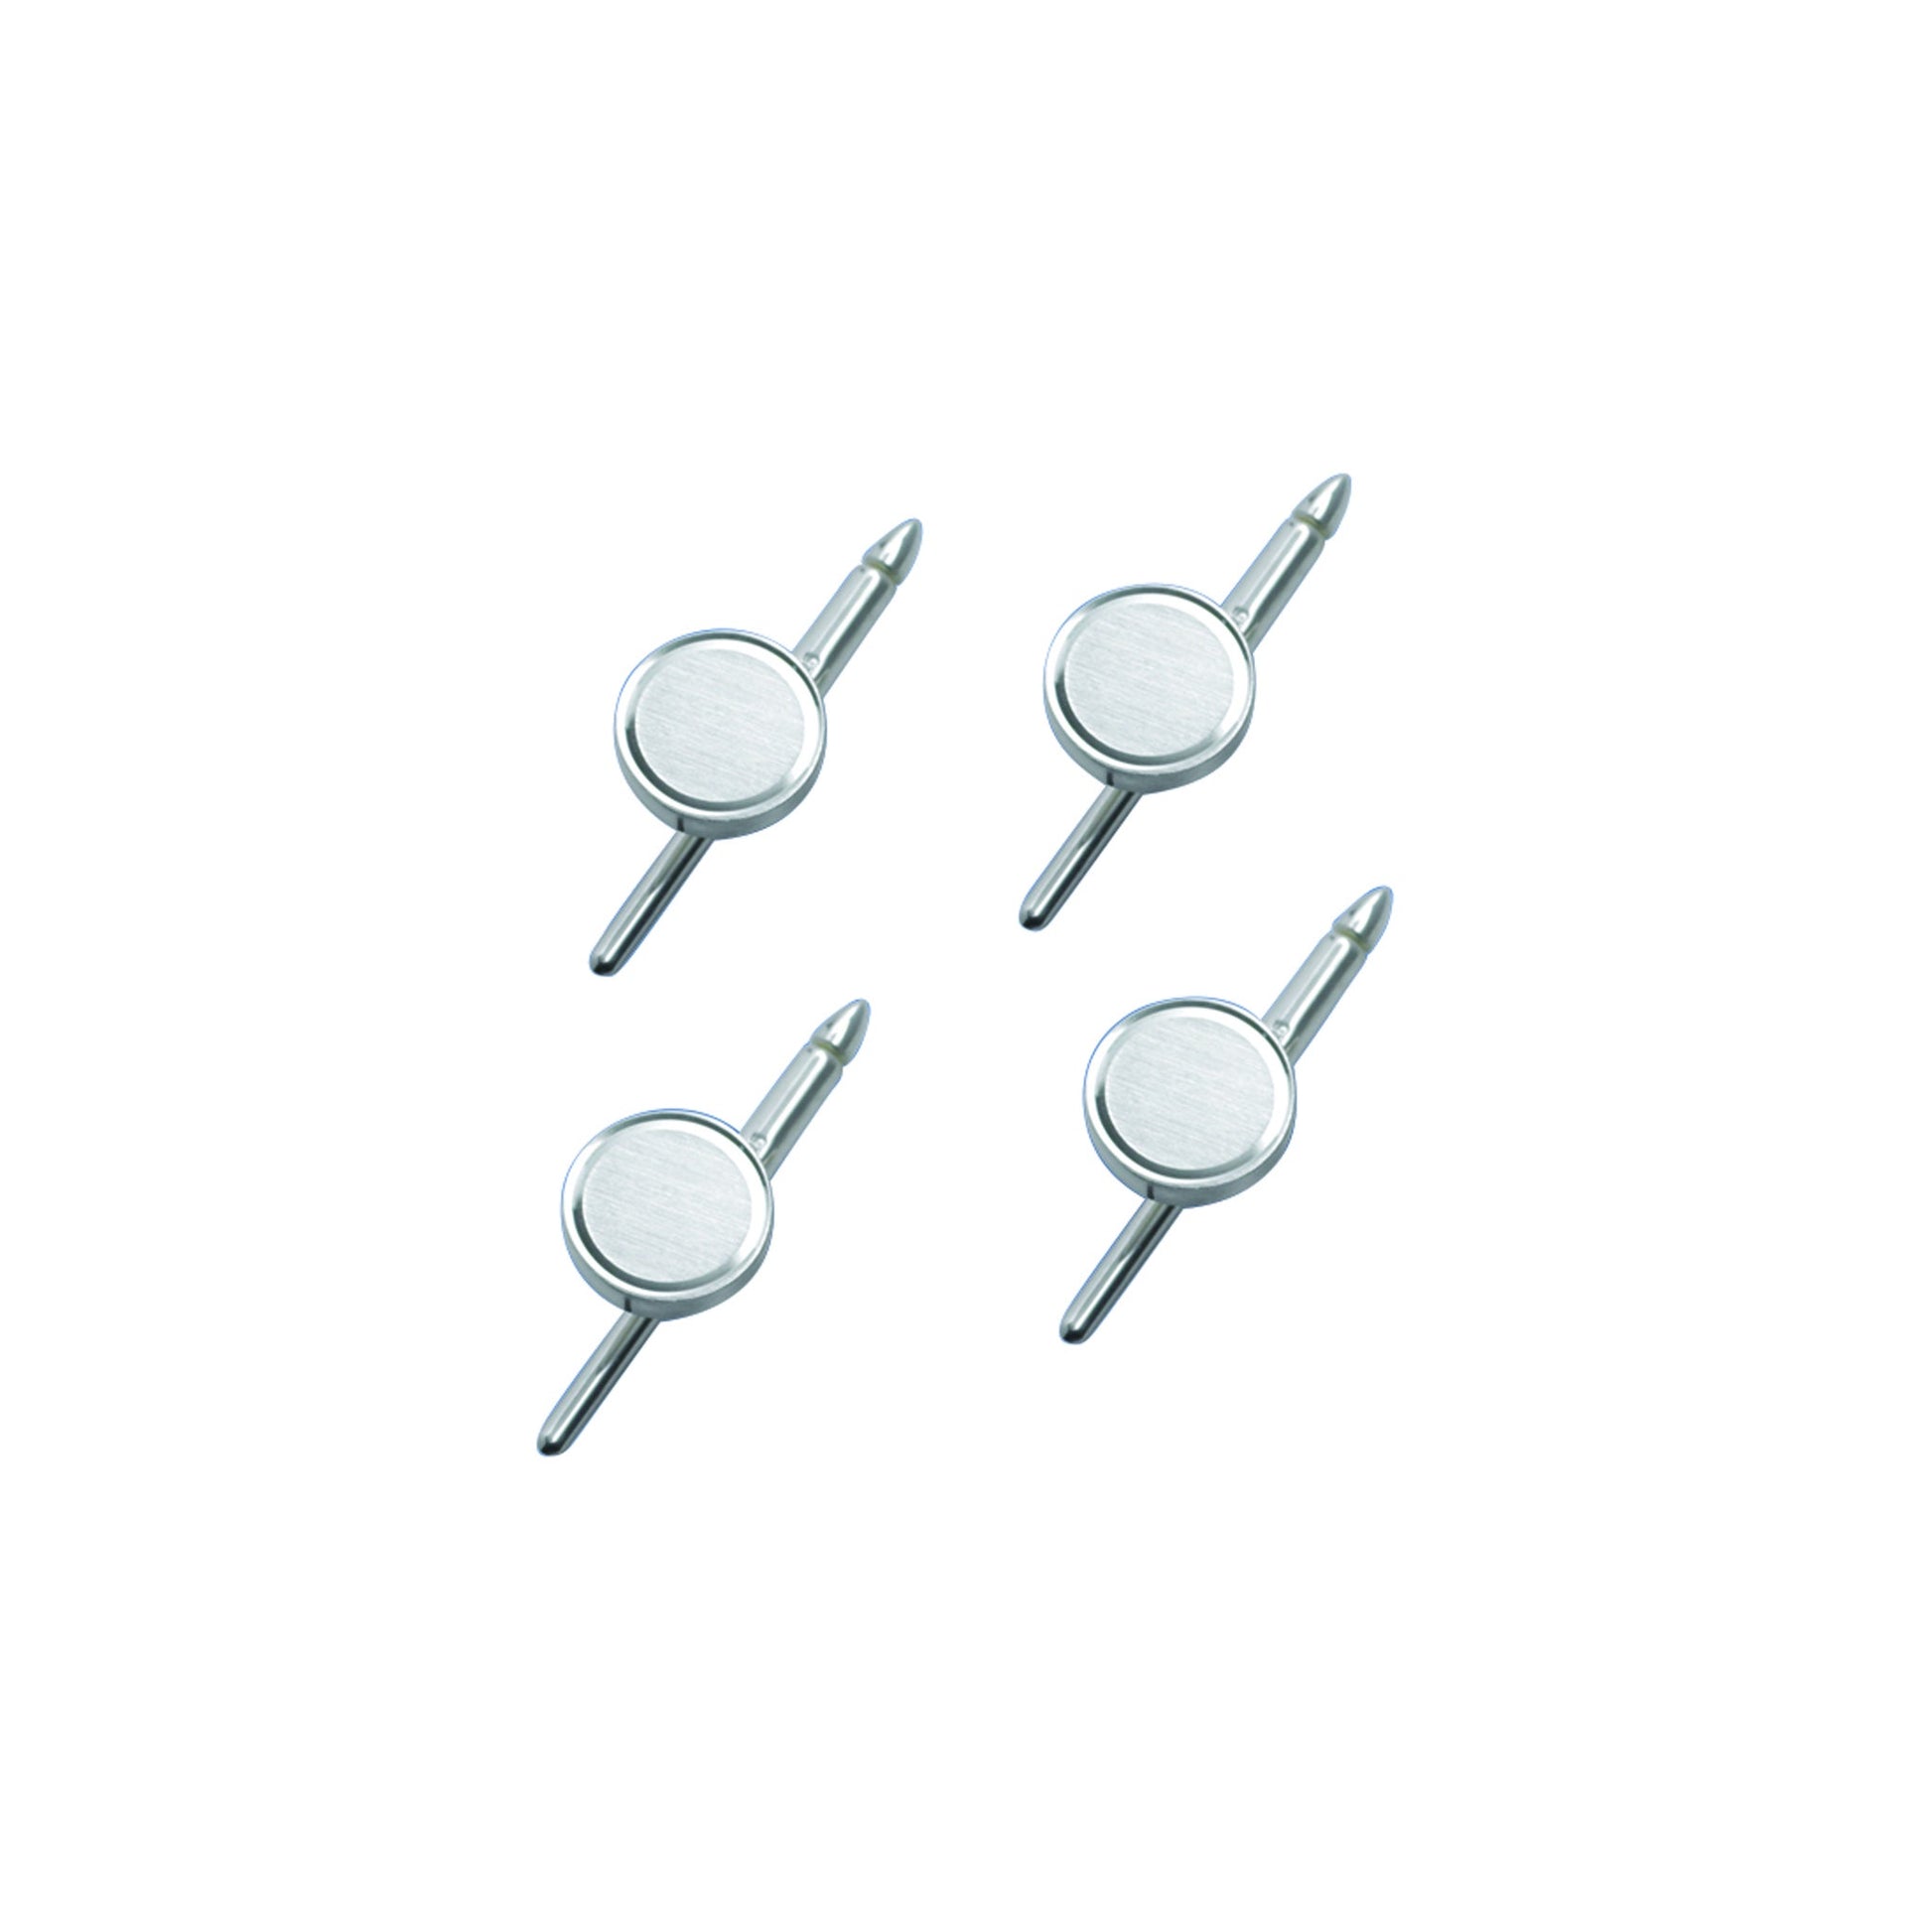 A four piece sterling silver brushed/burnished round stud set displayed on a neutral white background.